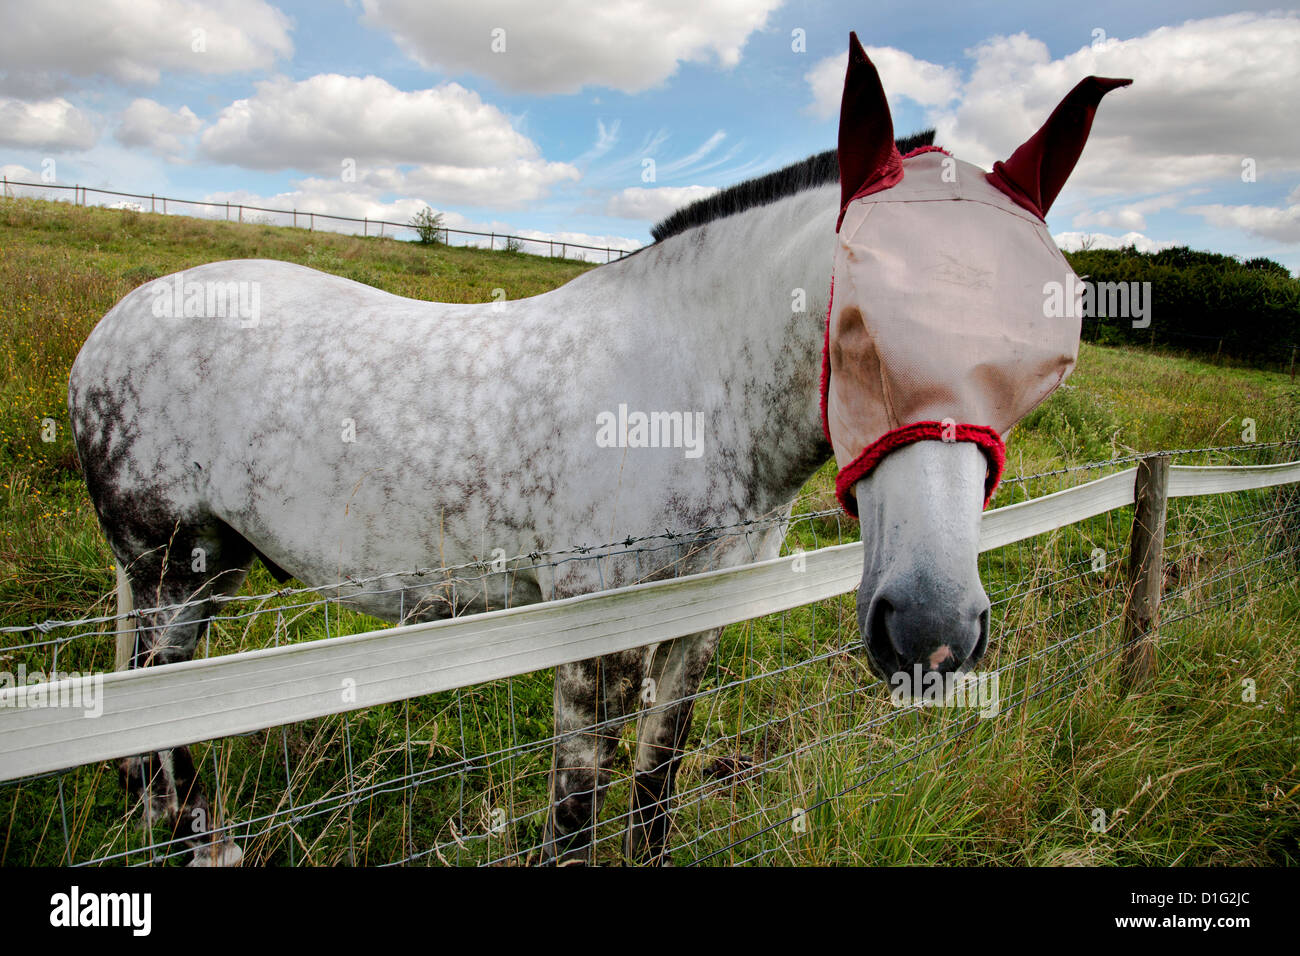 Dappled grey horse with fly mask leaning over an electrified fence Stock Photo